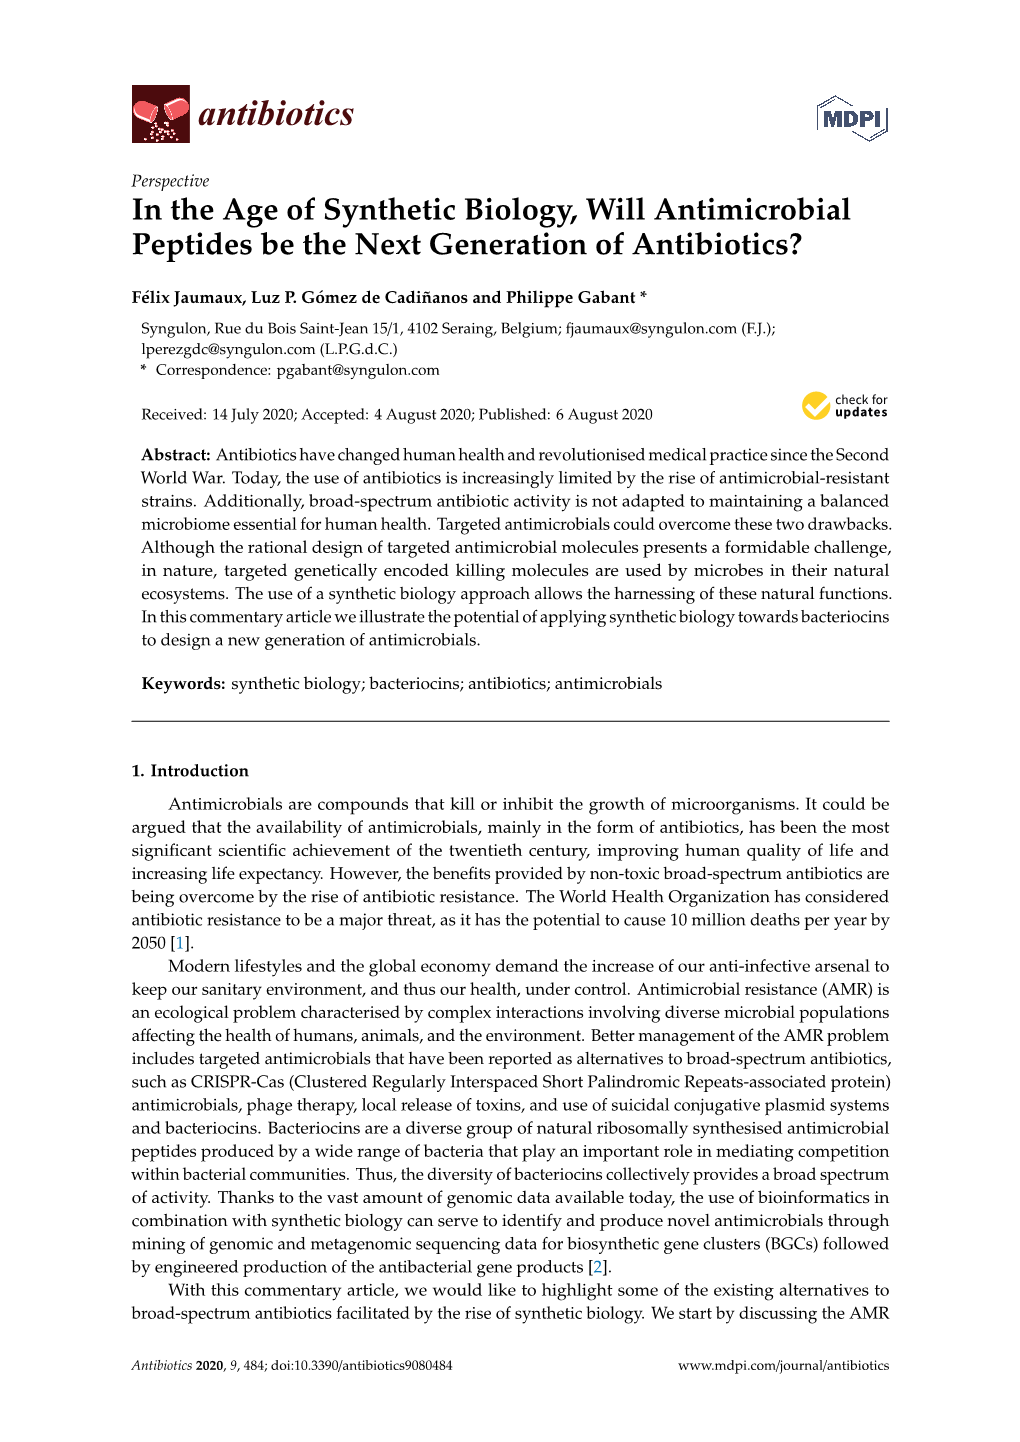 In the Age of Synthetic Biology, Will Antimicrobial Peptides Be the Next Generation of Antibiotics?